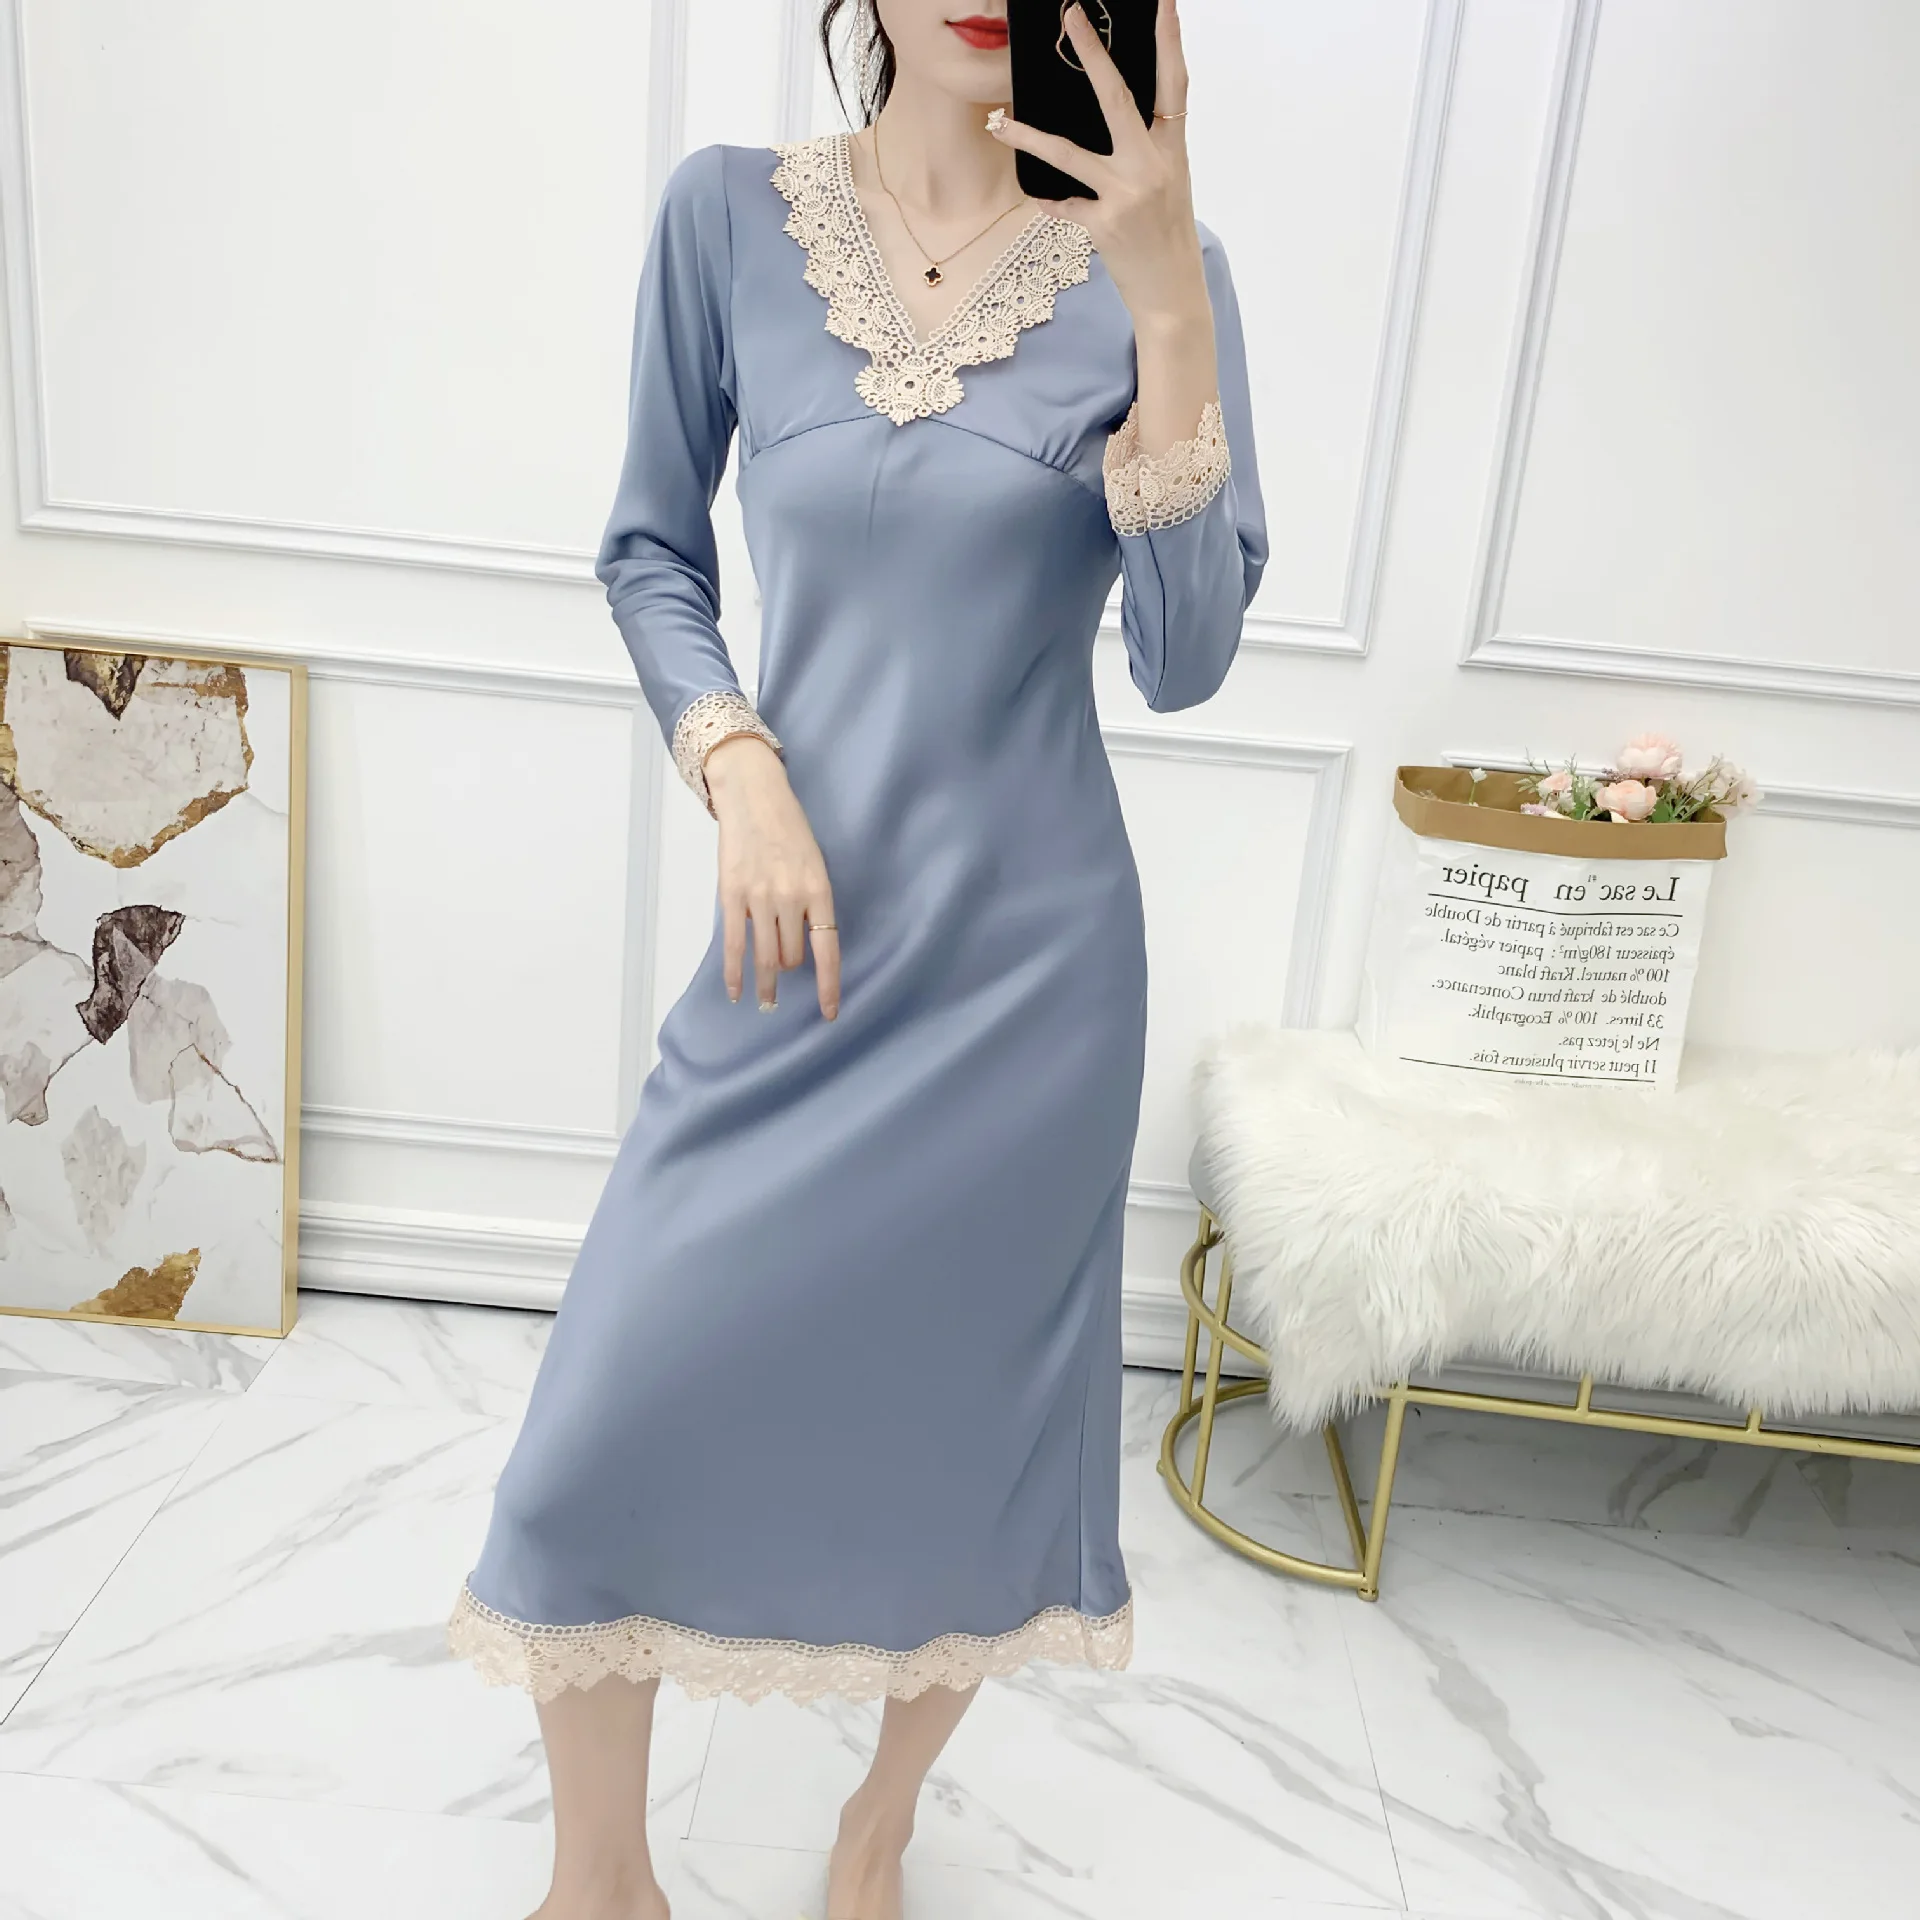 

Gray Sexy Lace Floral Lady Nightgown Full Sleeve Rayon Nightdress Bride Dressing Gown V-Neck Long Sleepshirts Summer Home Skirt